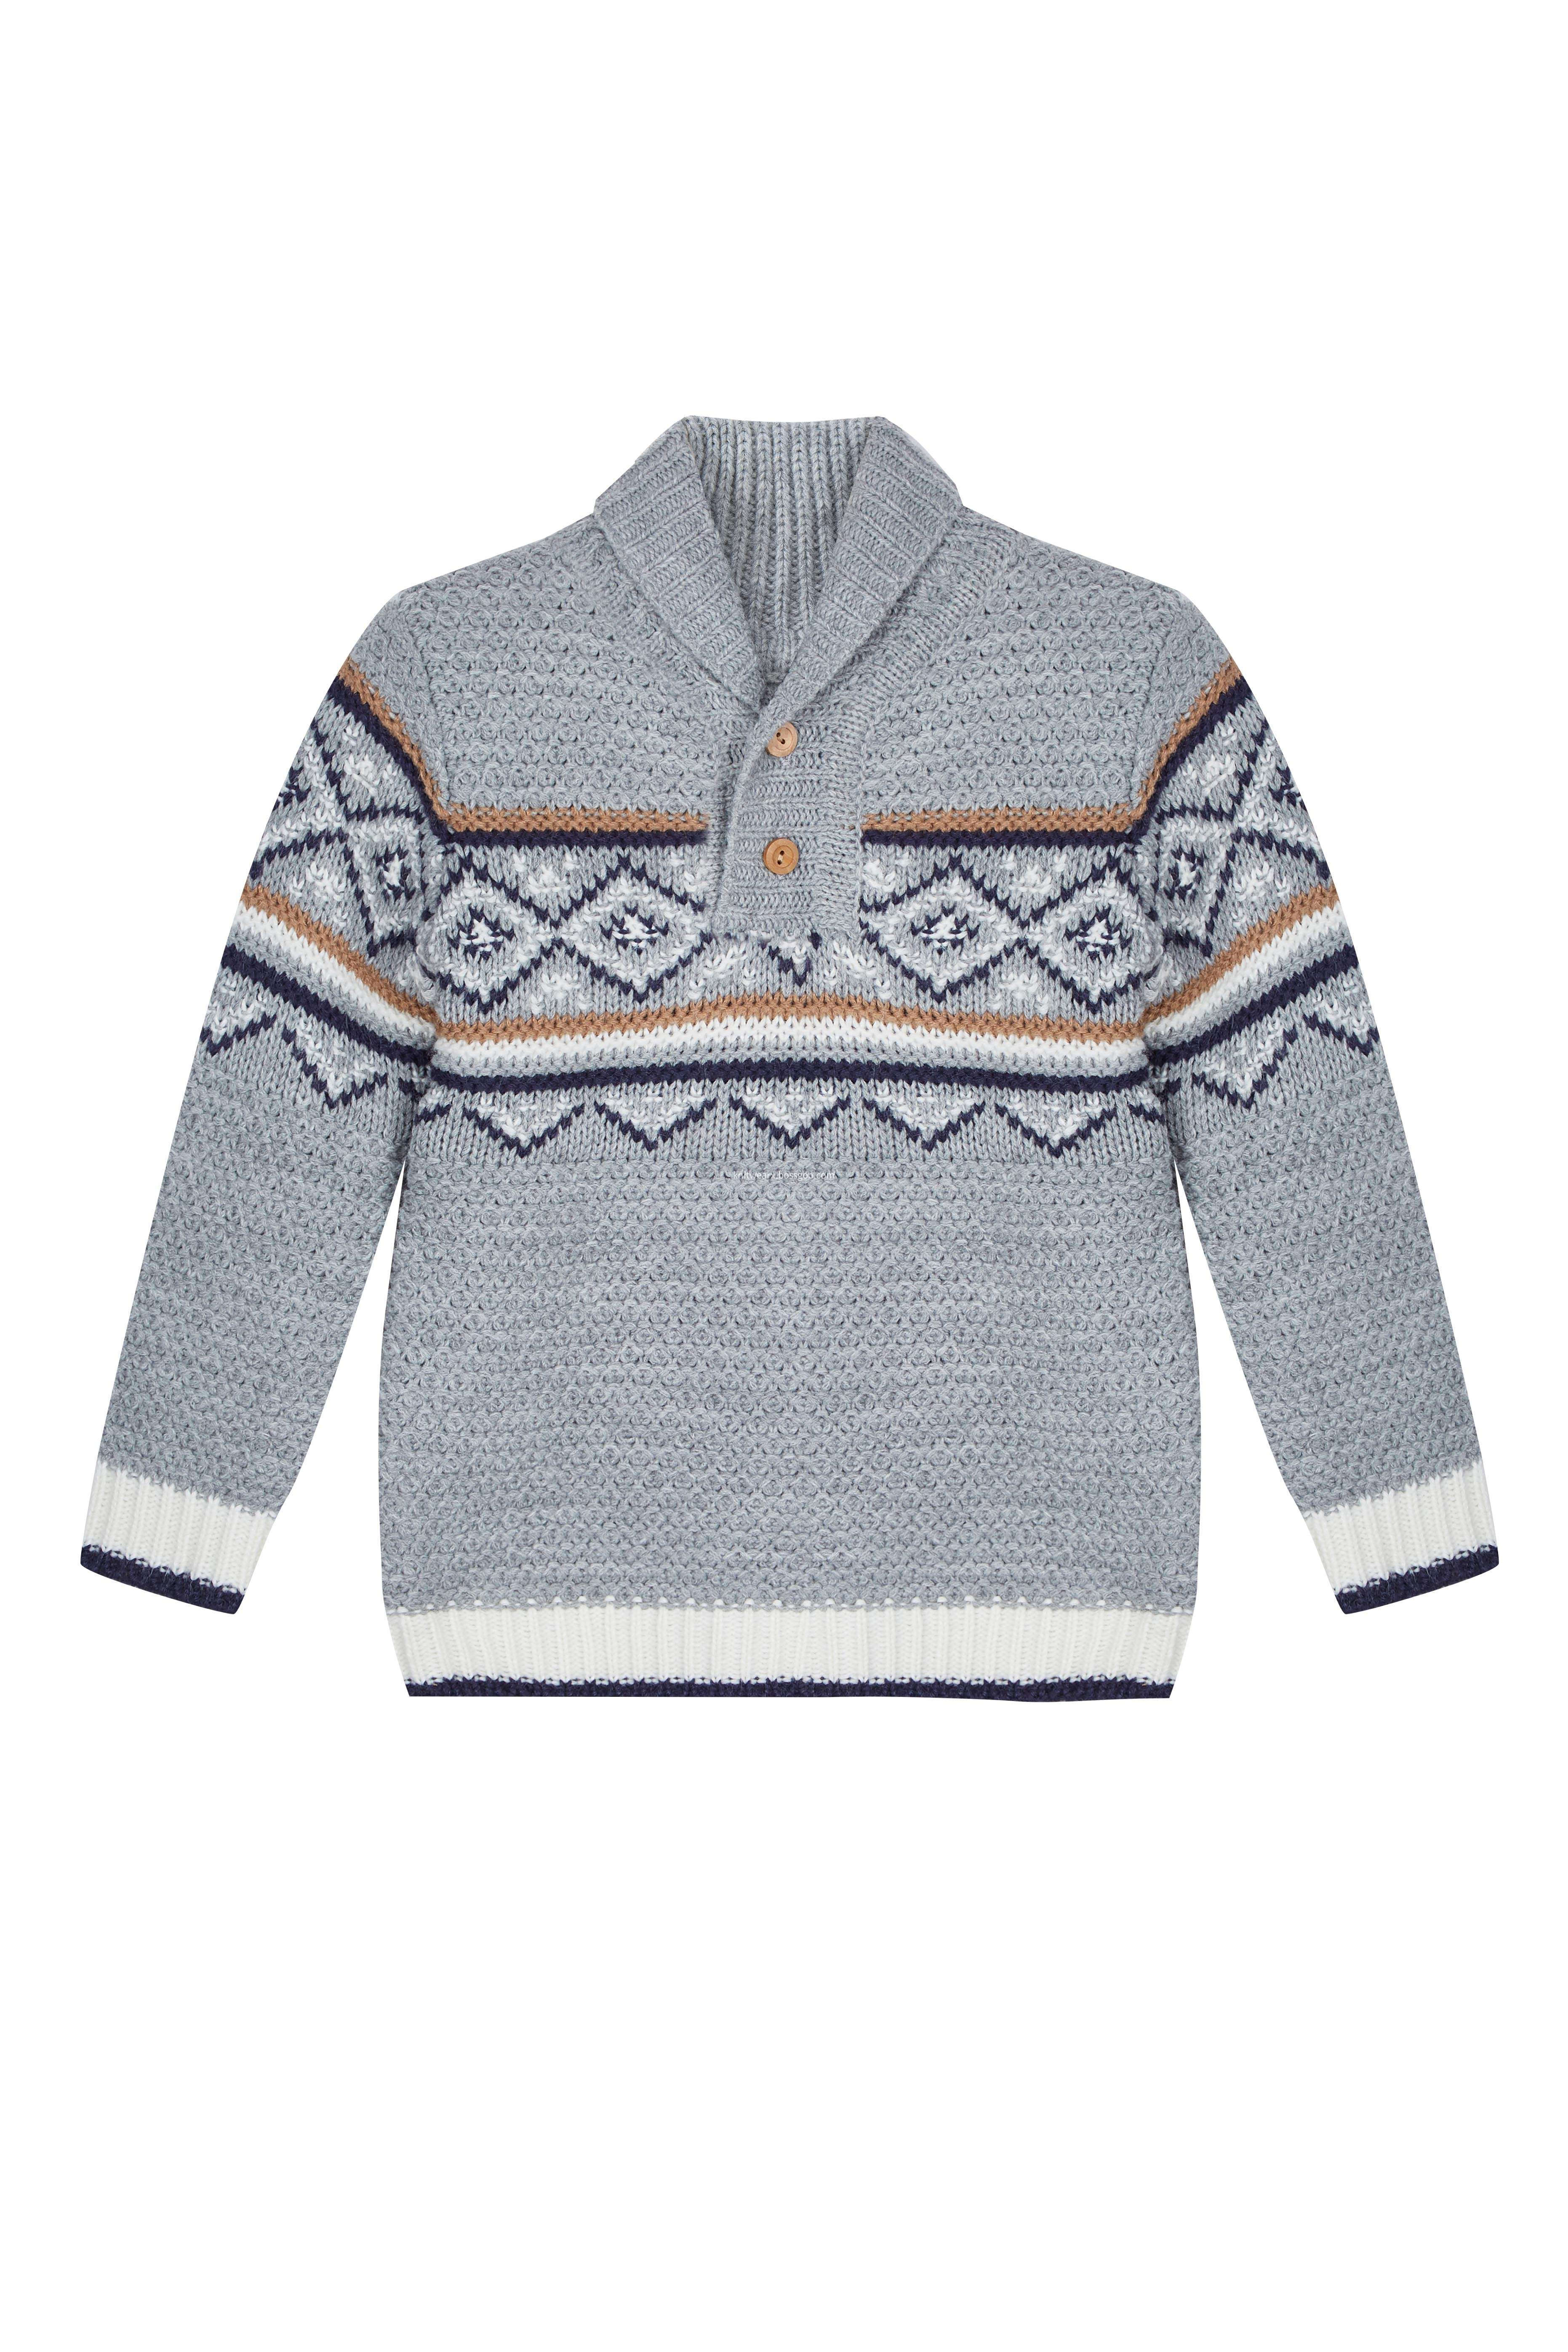 Boy's Knitted Diamond Jacquard Shawl Neck Pullover